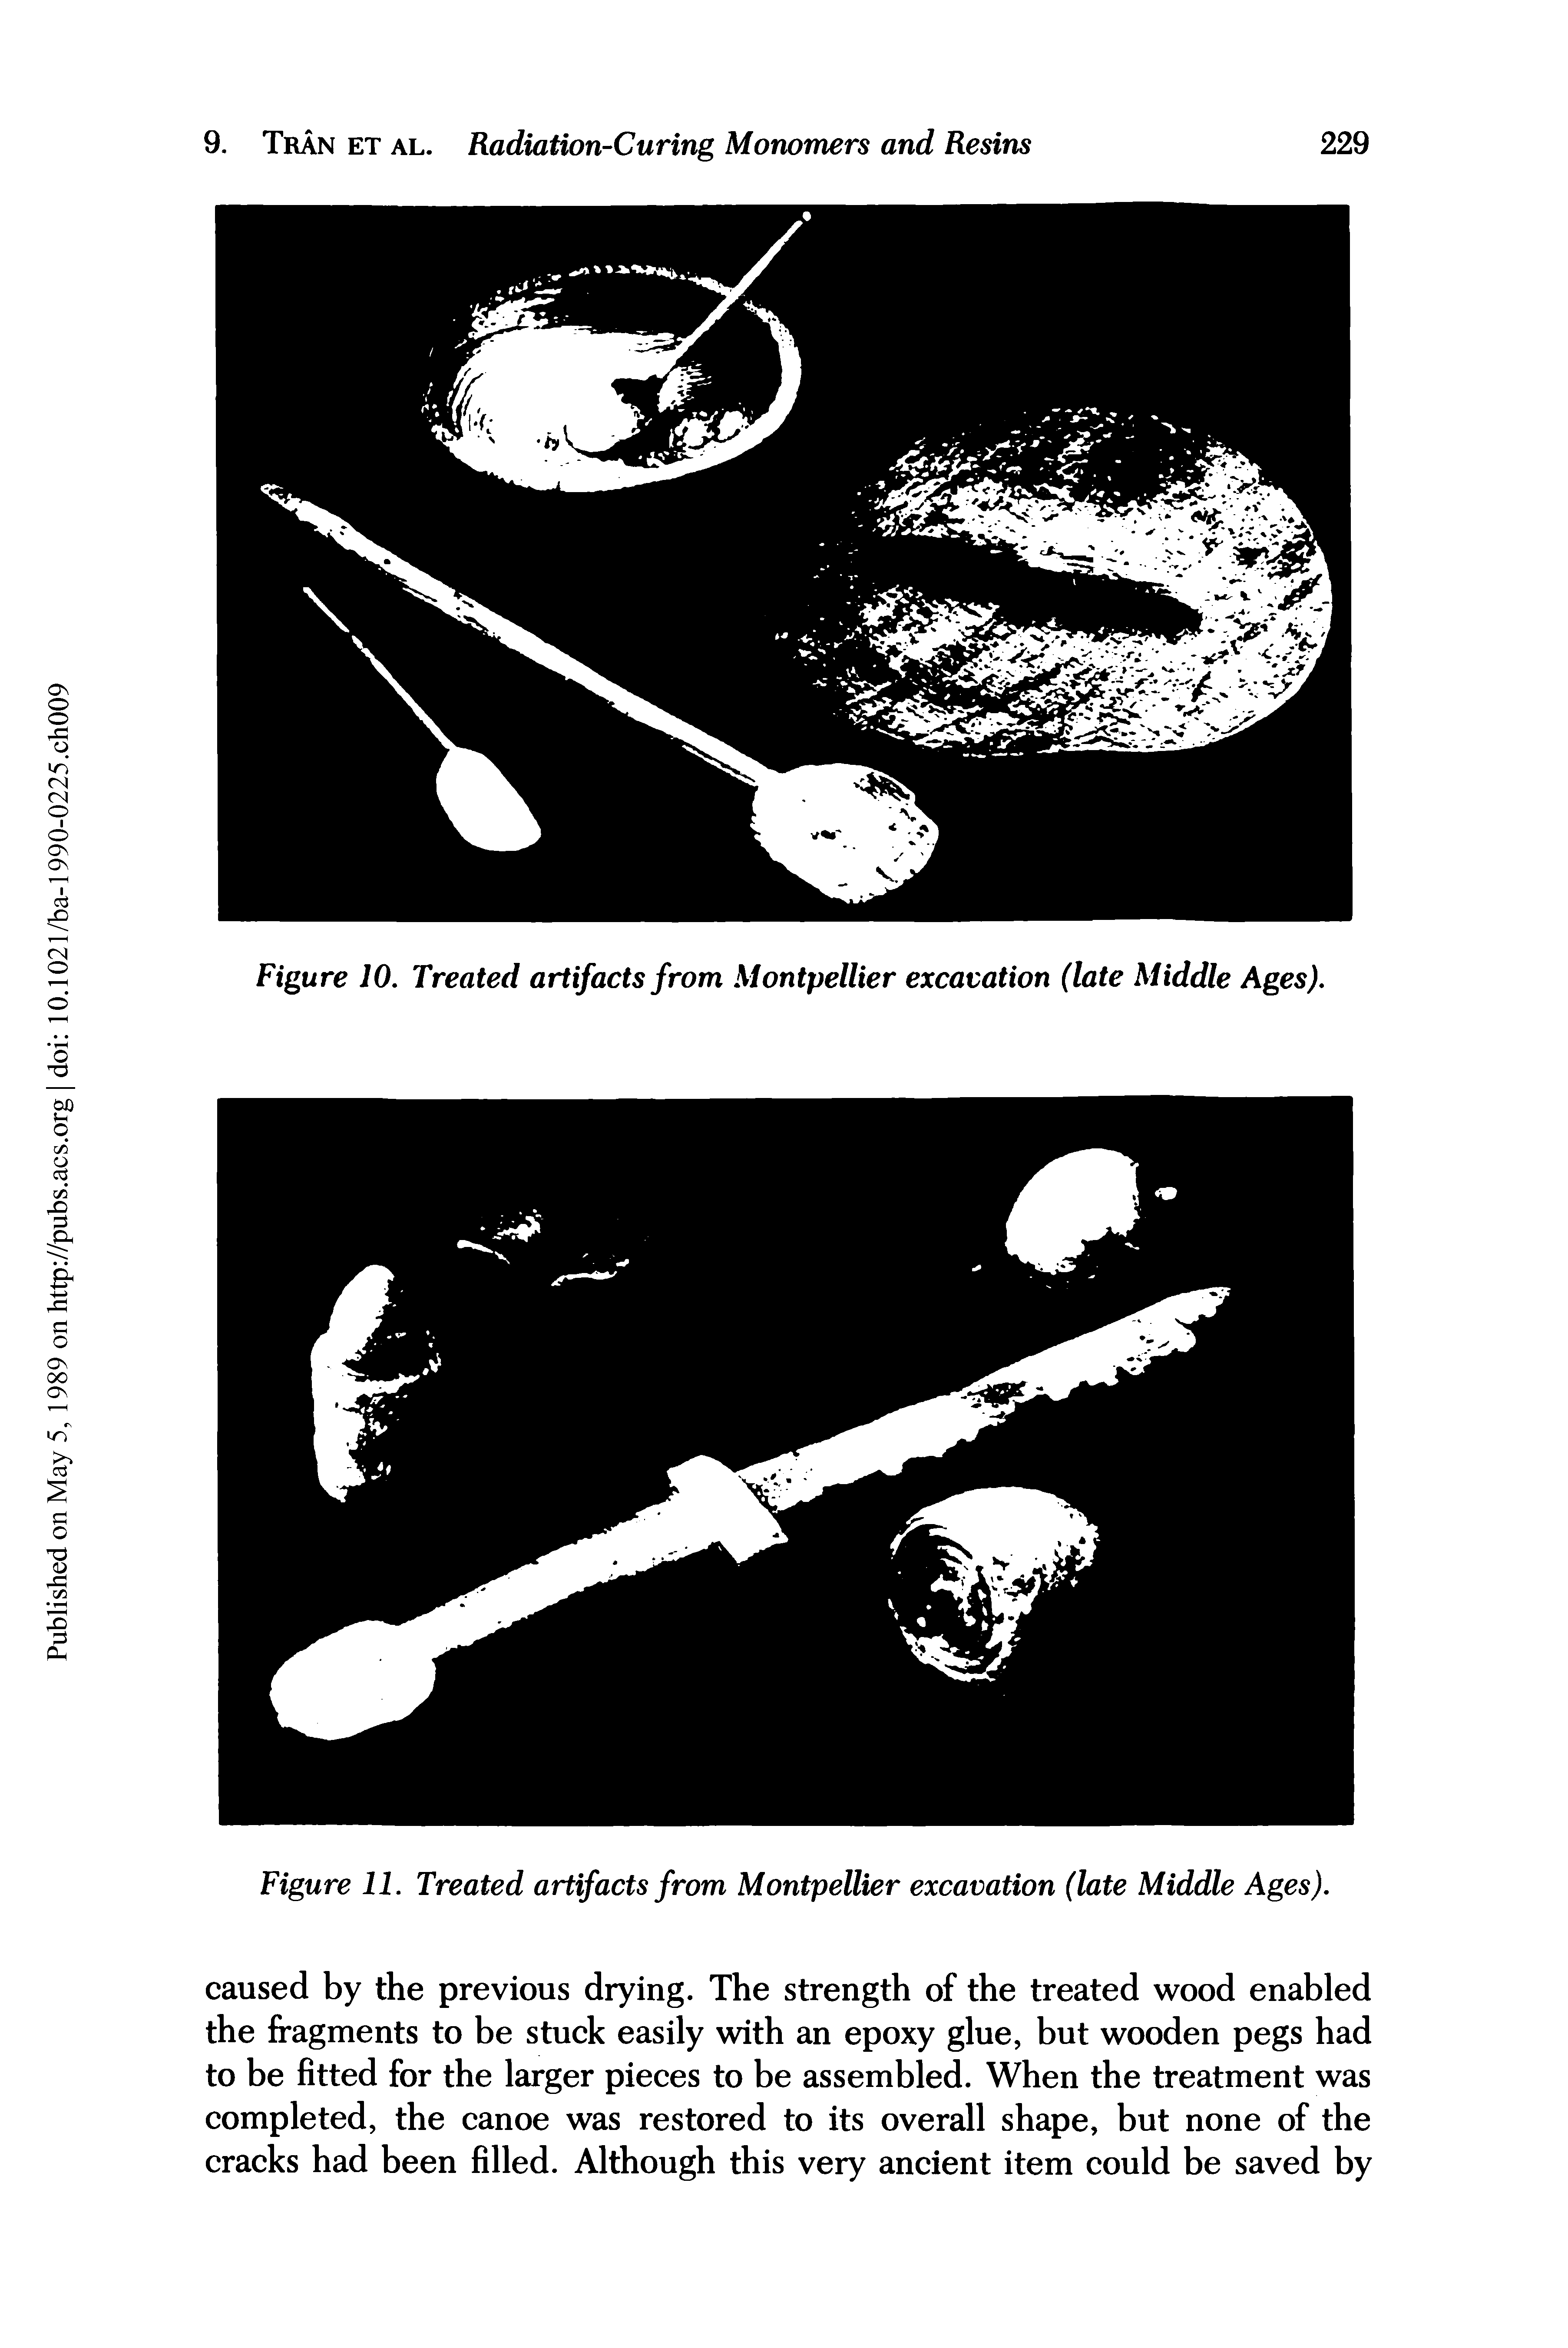 Figure 10. Treated artifacts from Montpellier excavation (late Middle Ages).